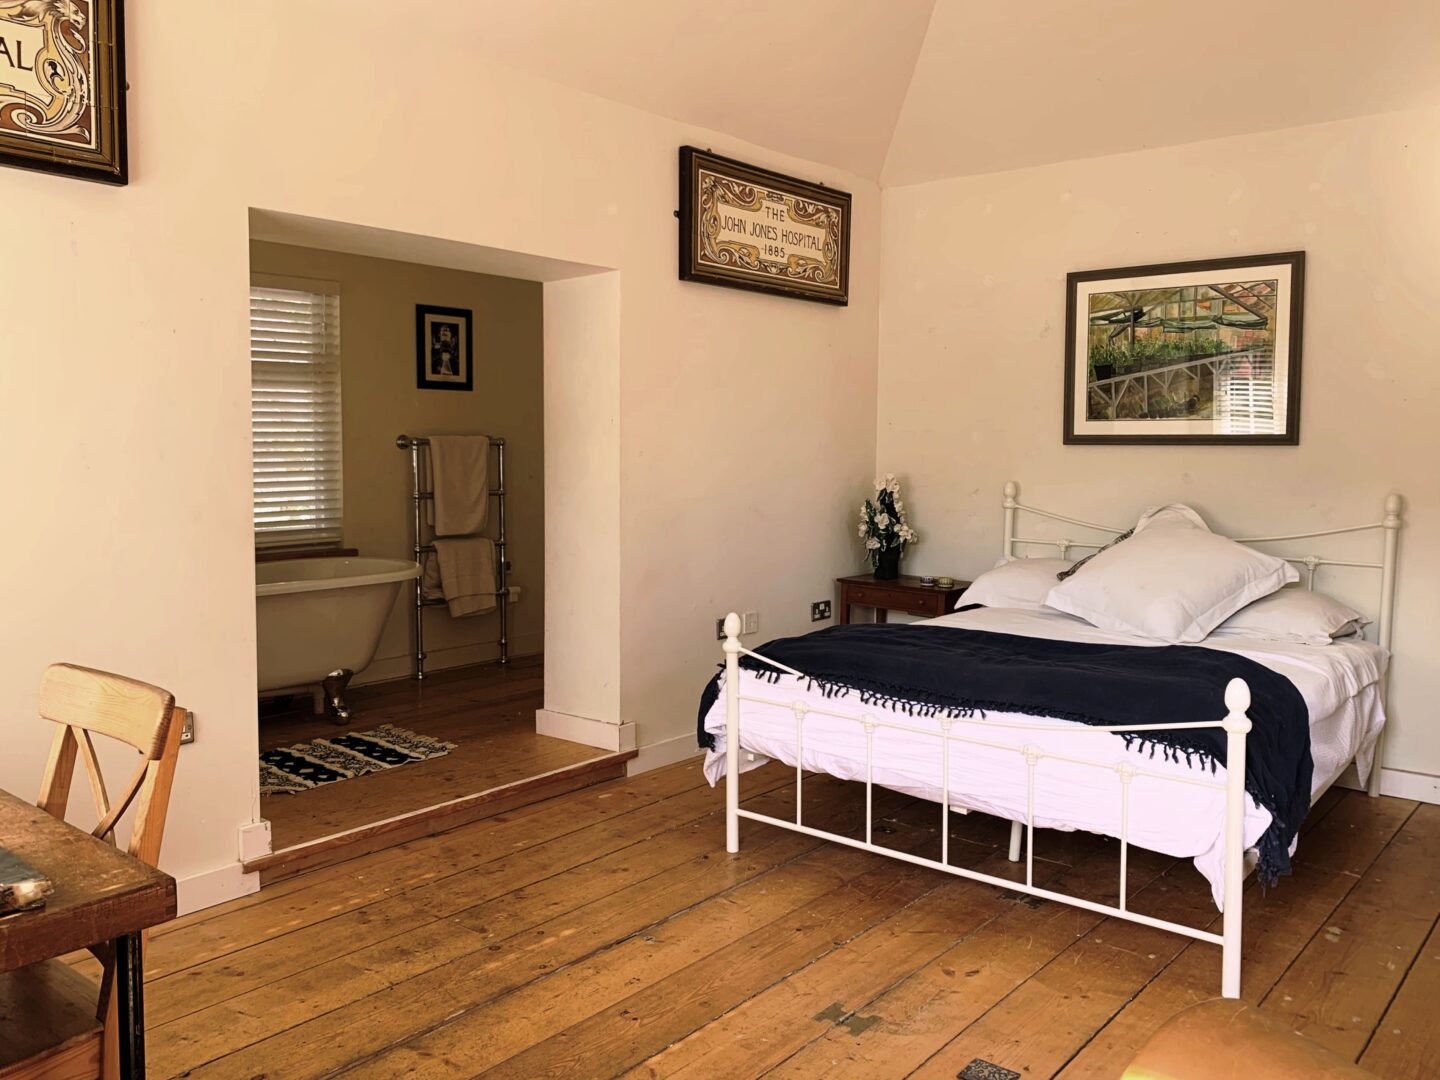 A view of a bedroom within one of the Ventnor Botanic Garden, self-catering cottages. Showing beautiful wooden floors, a metal bed with thick duvet and a view through to the bathroom with rolltop bath.